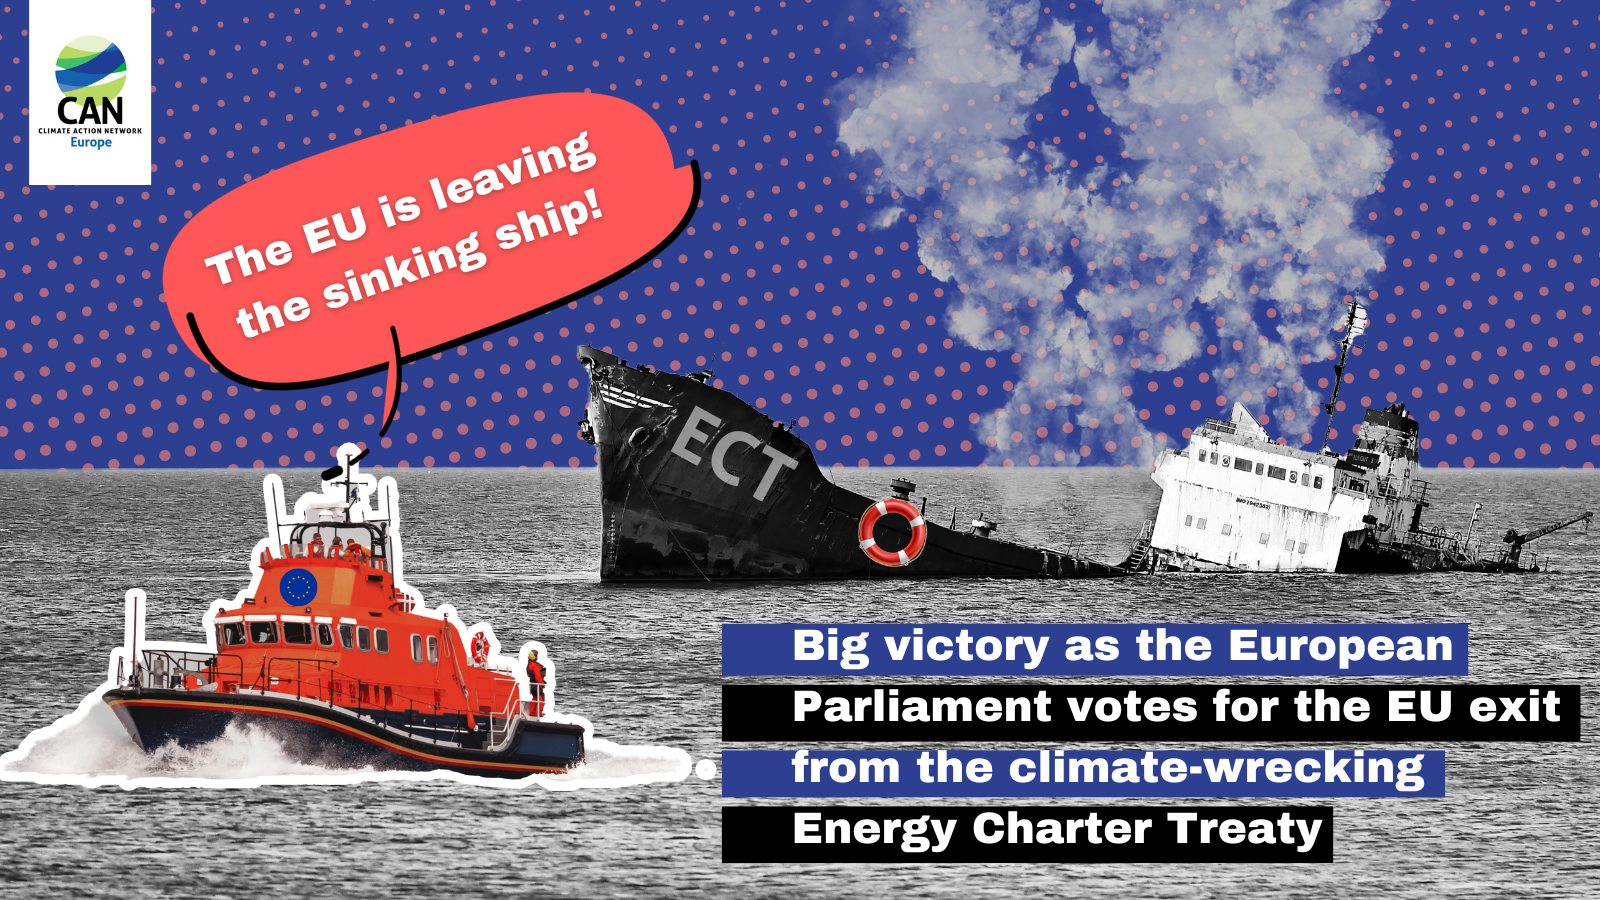 Major victory as the European Parliament votes overwhelmingly in favour of exiting the climate-wrecking Energy Charter Treaty